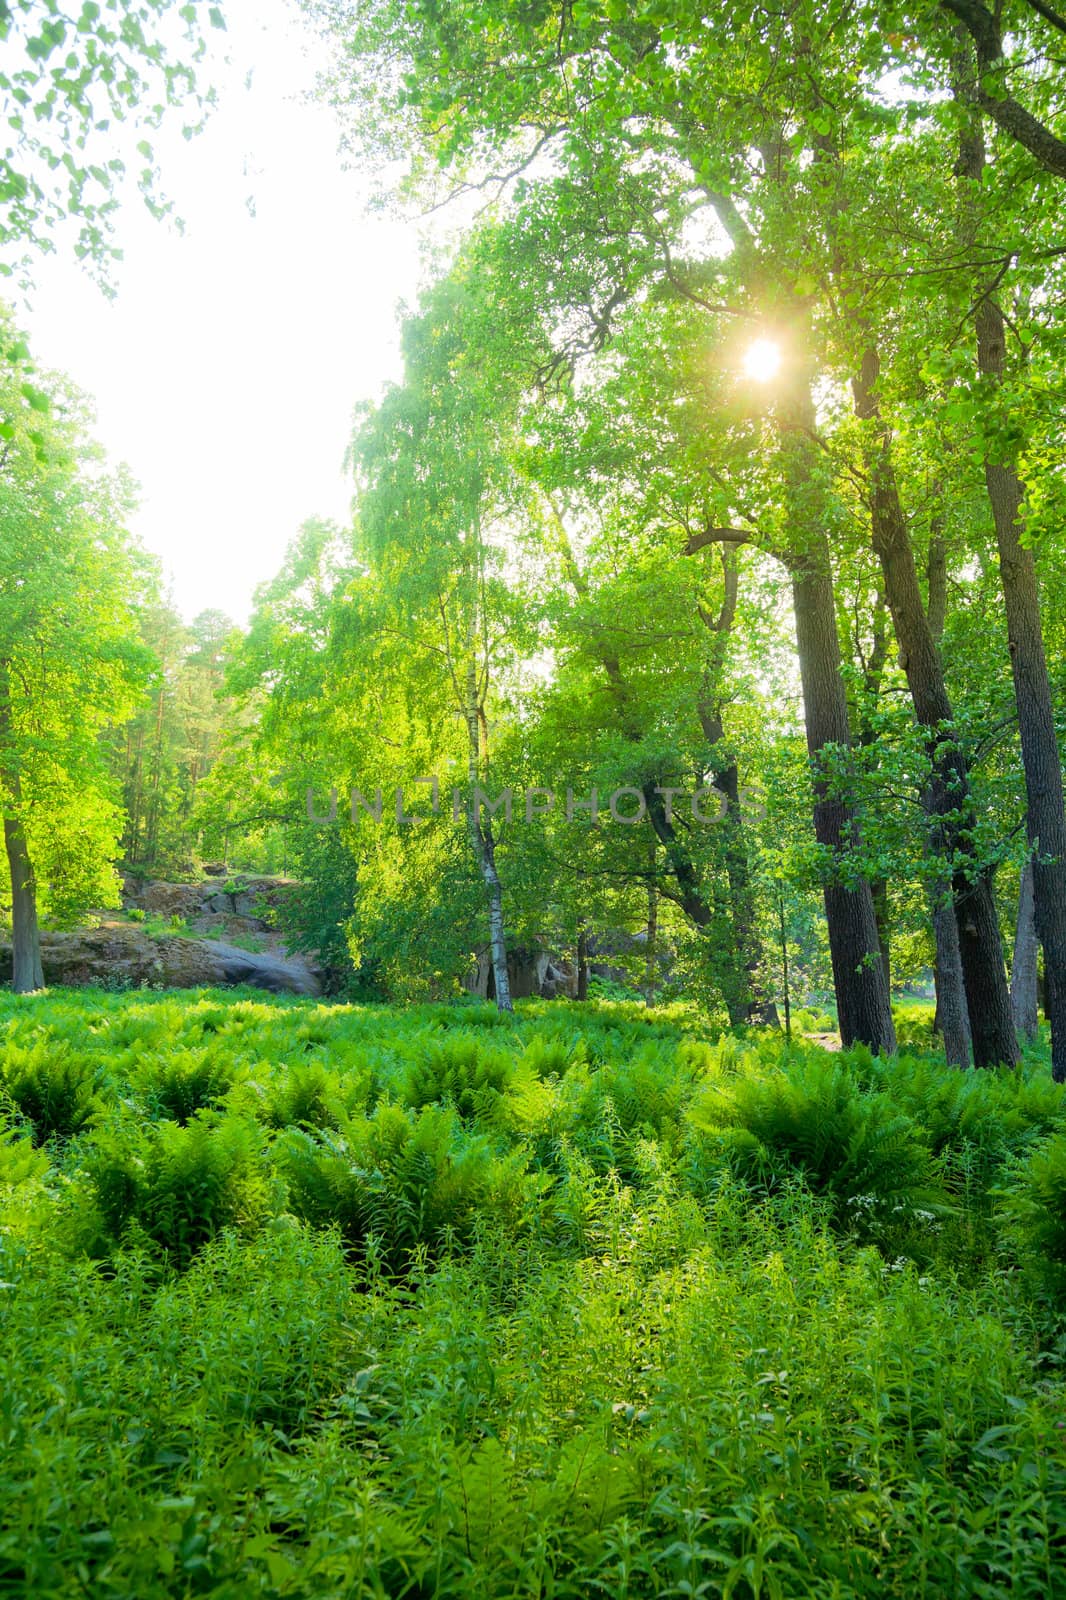 Bright green forest with sun rays passing through the trees